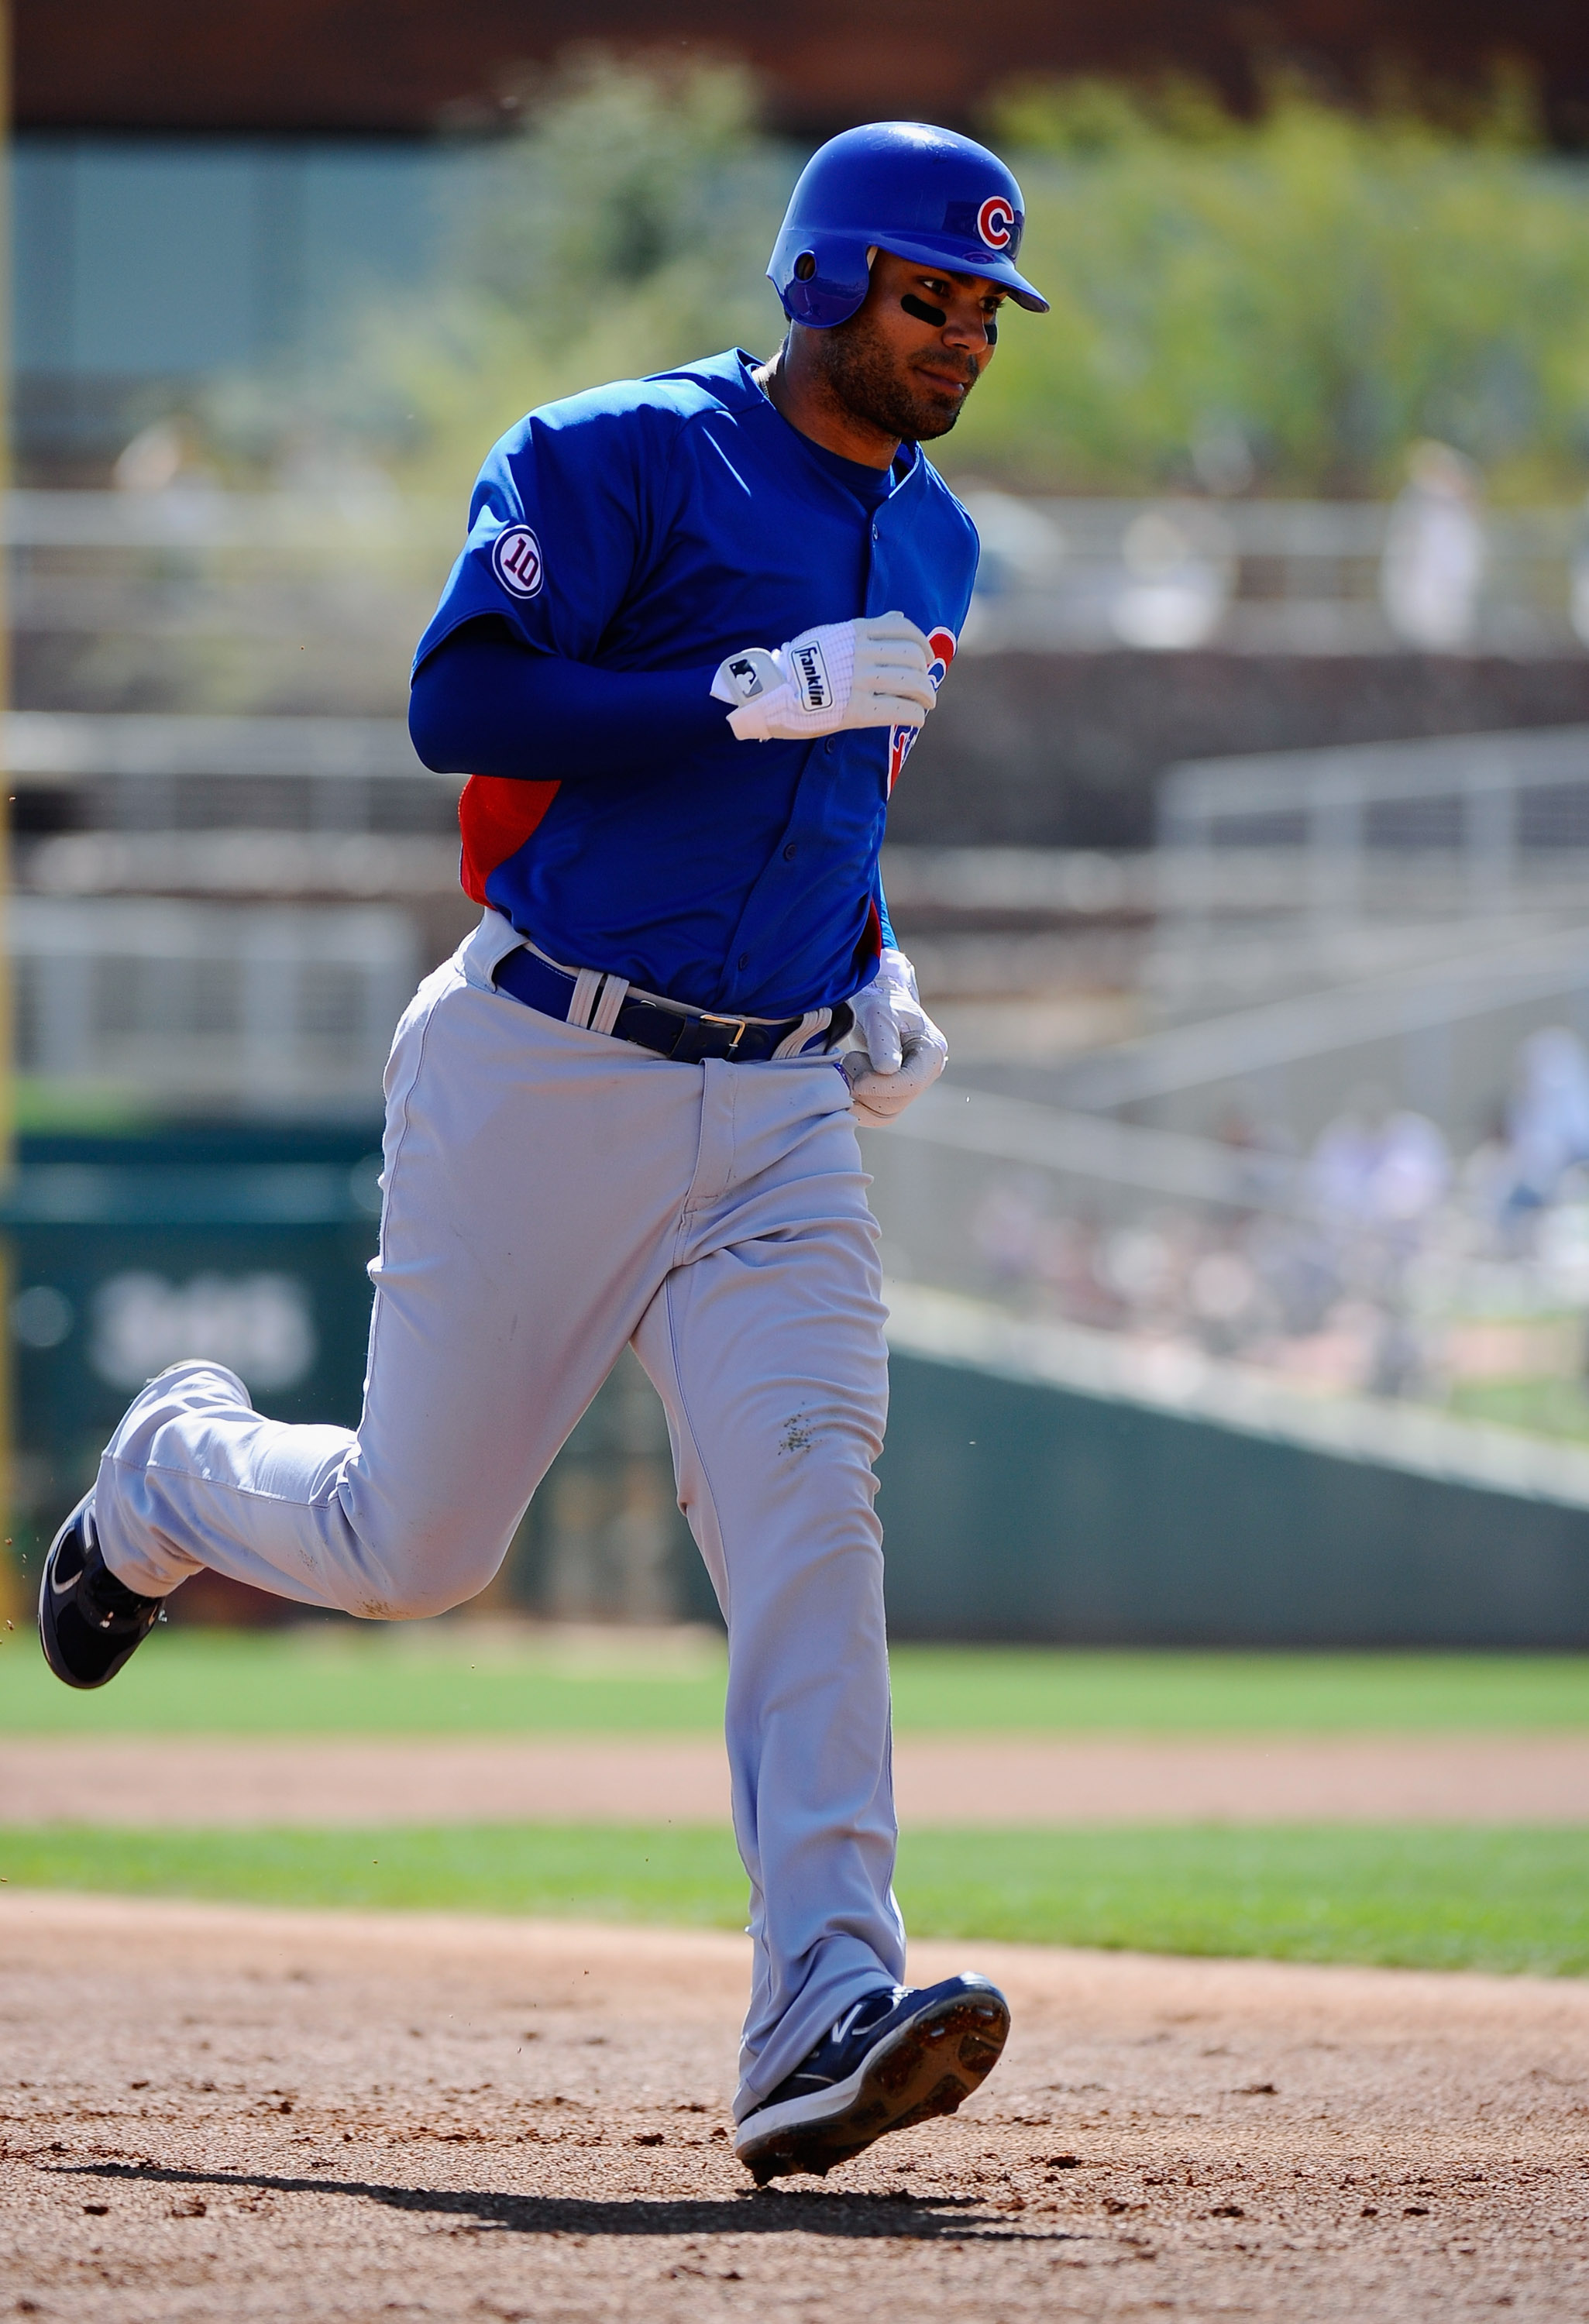 GLENDALE, AZ - MARCH 11:  Carlos Pena #22 of the Chicago Cubs circle the bases aftet a hitting a one run home run against the Chicago White Sox during the second inning of the spring training baseball game at Camelback Ranch on March 11, 2011 in Glendale,